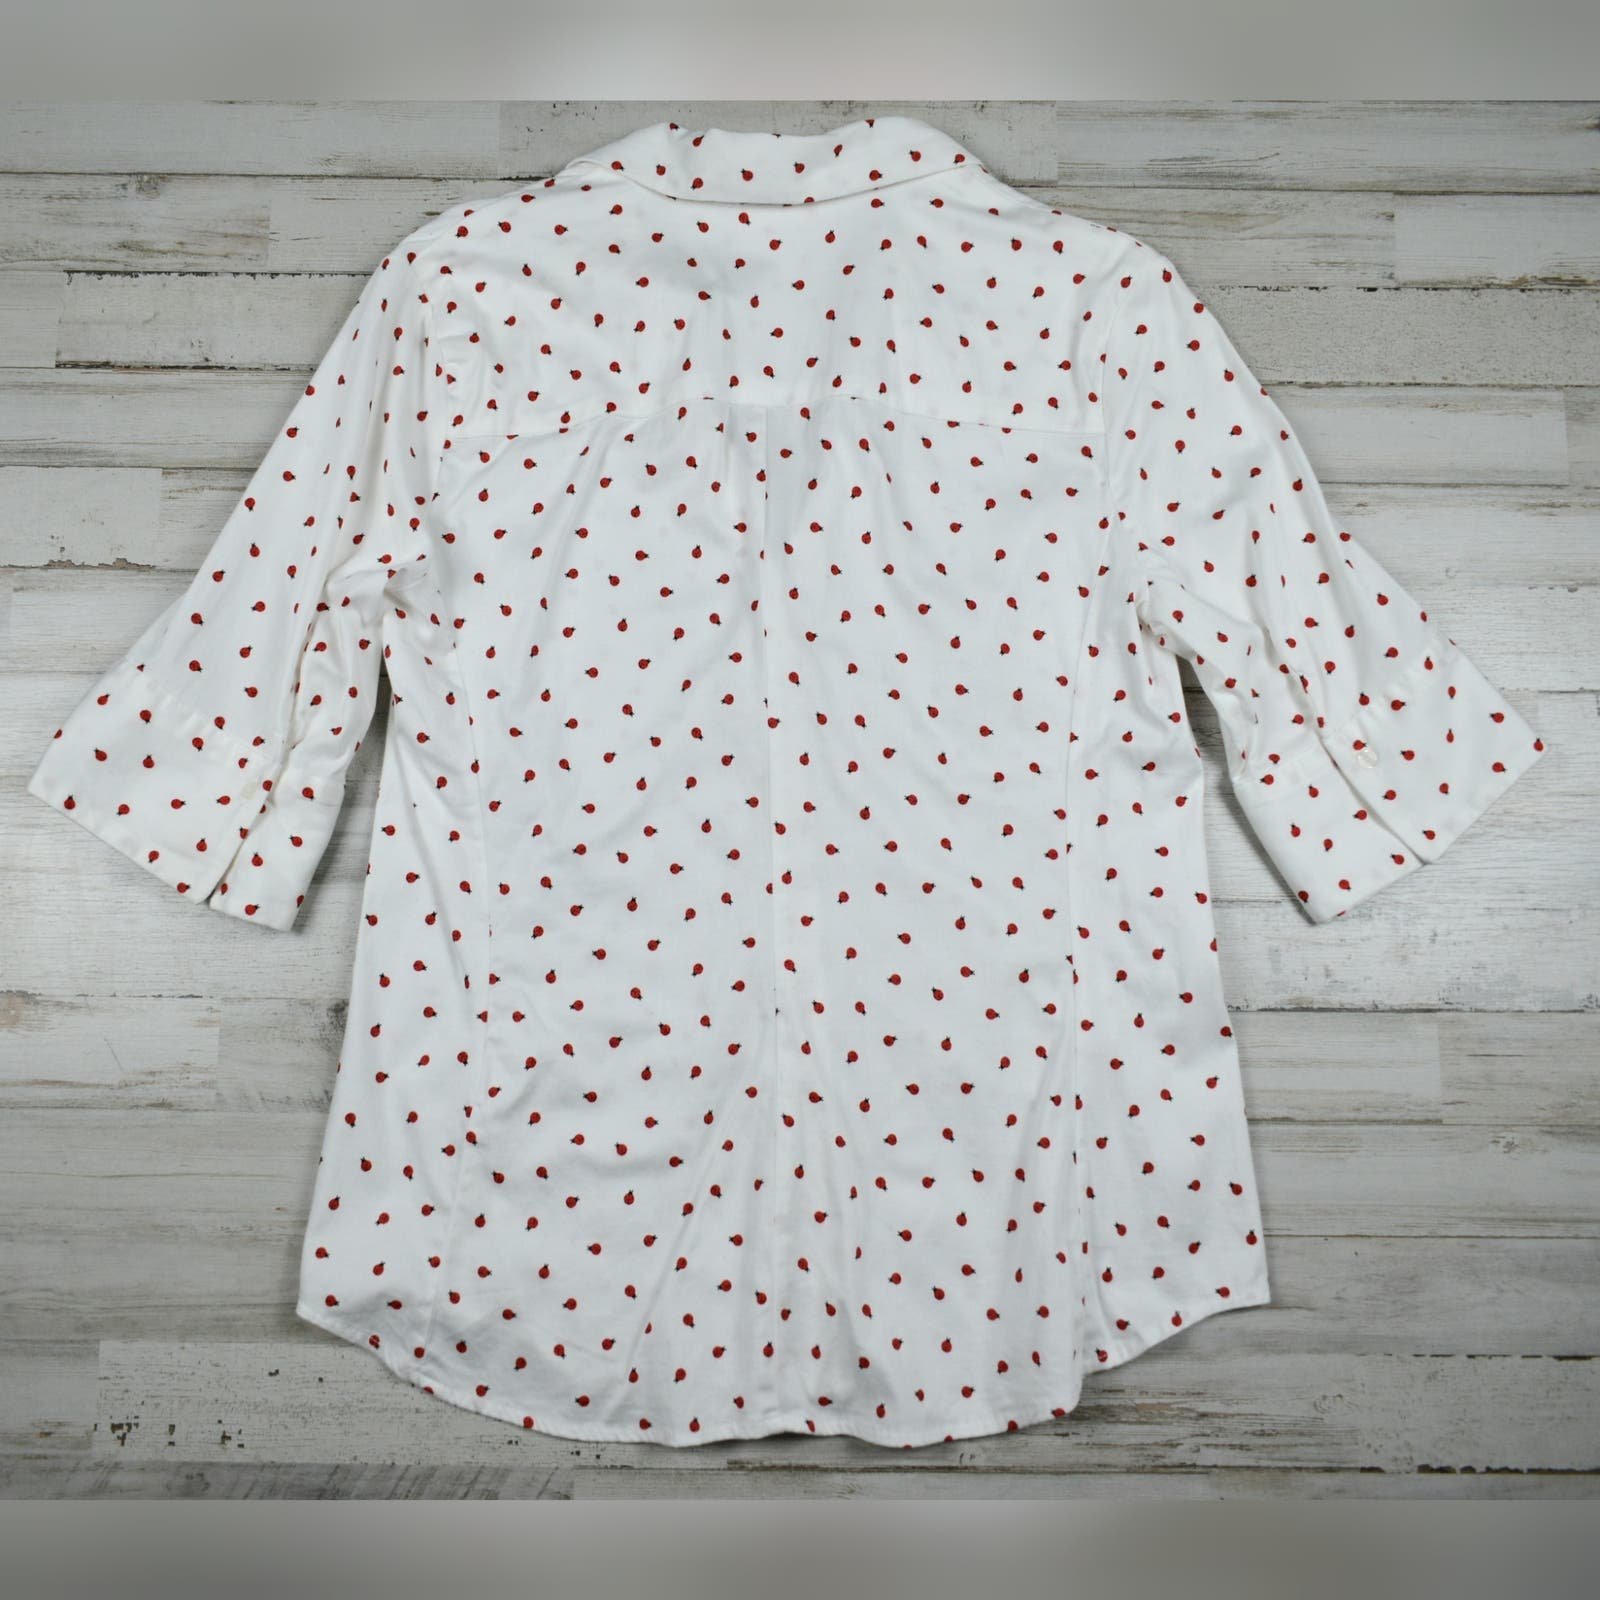 Nice Novelty red ladybug white button down half sleeve shirt New York & Co sz large oO3wI8FsR US Outlet